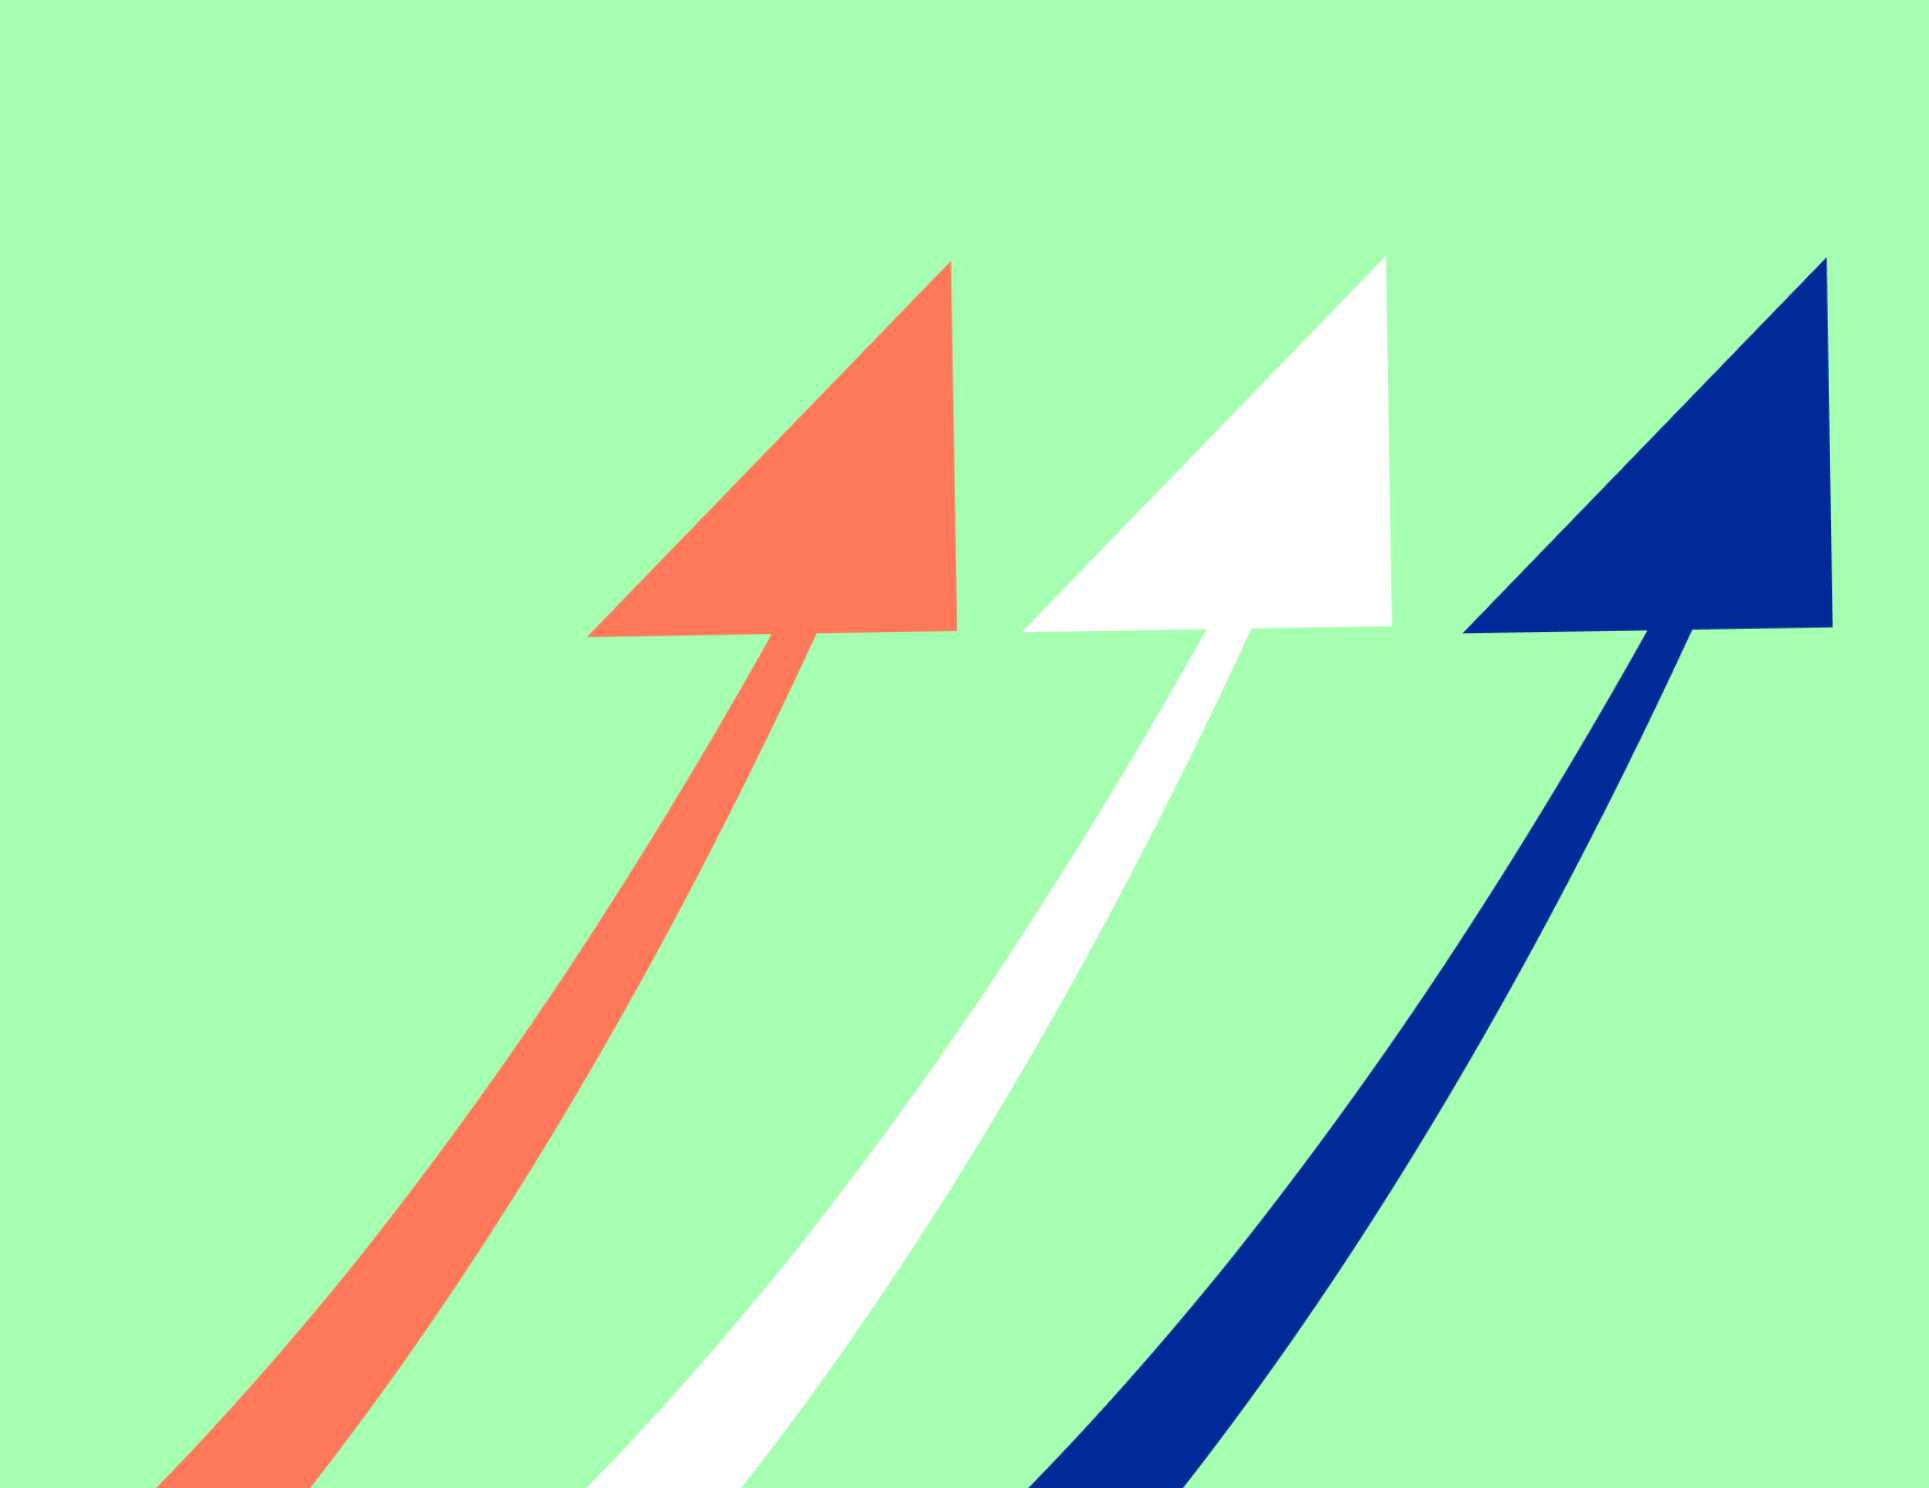 image of orange, white and blue arrows on a green background